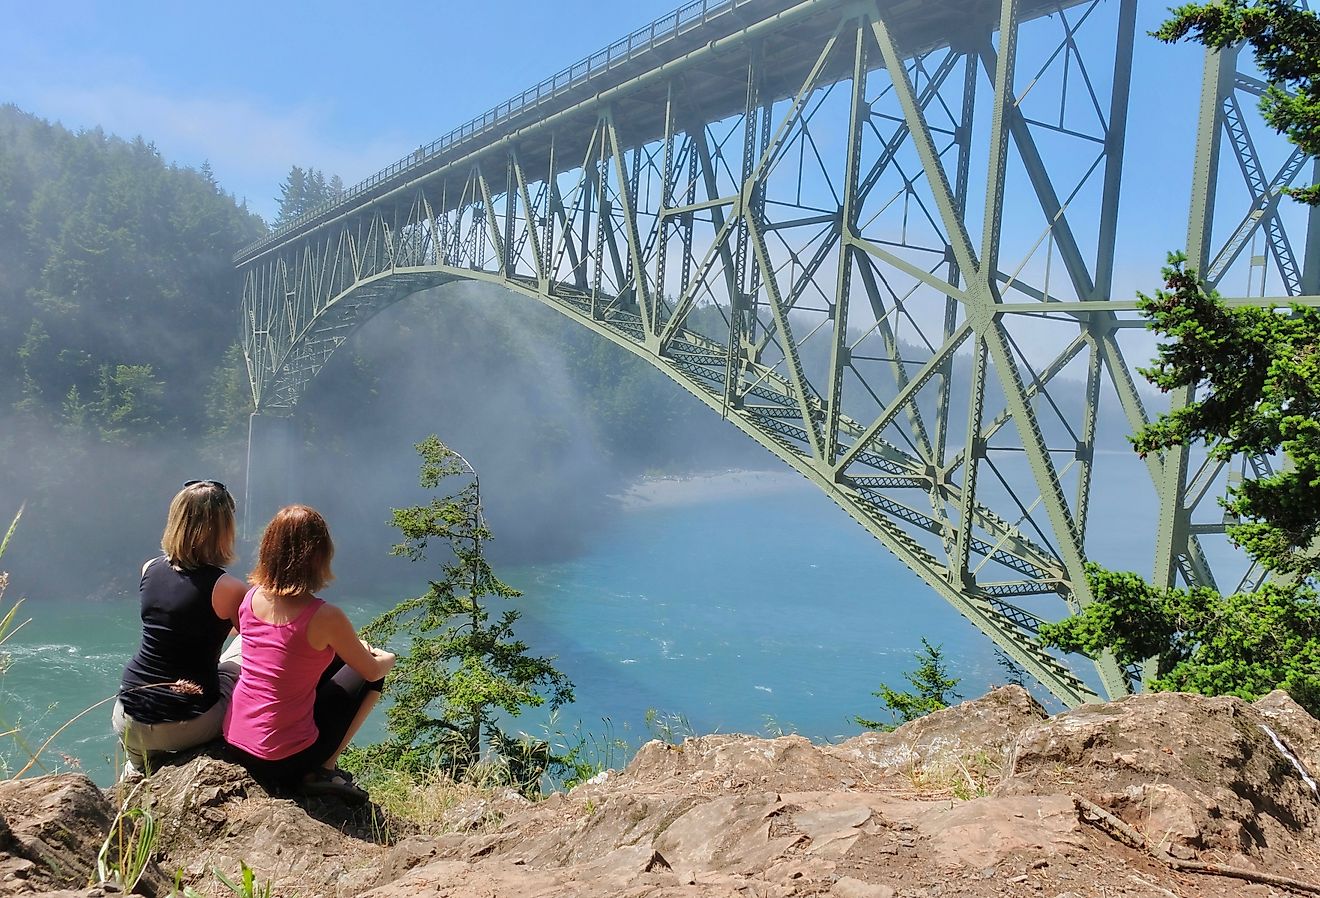 Group of women by ocean in foggy morning in Deception Pass Bridge Park, Anacortes, Washington. 